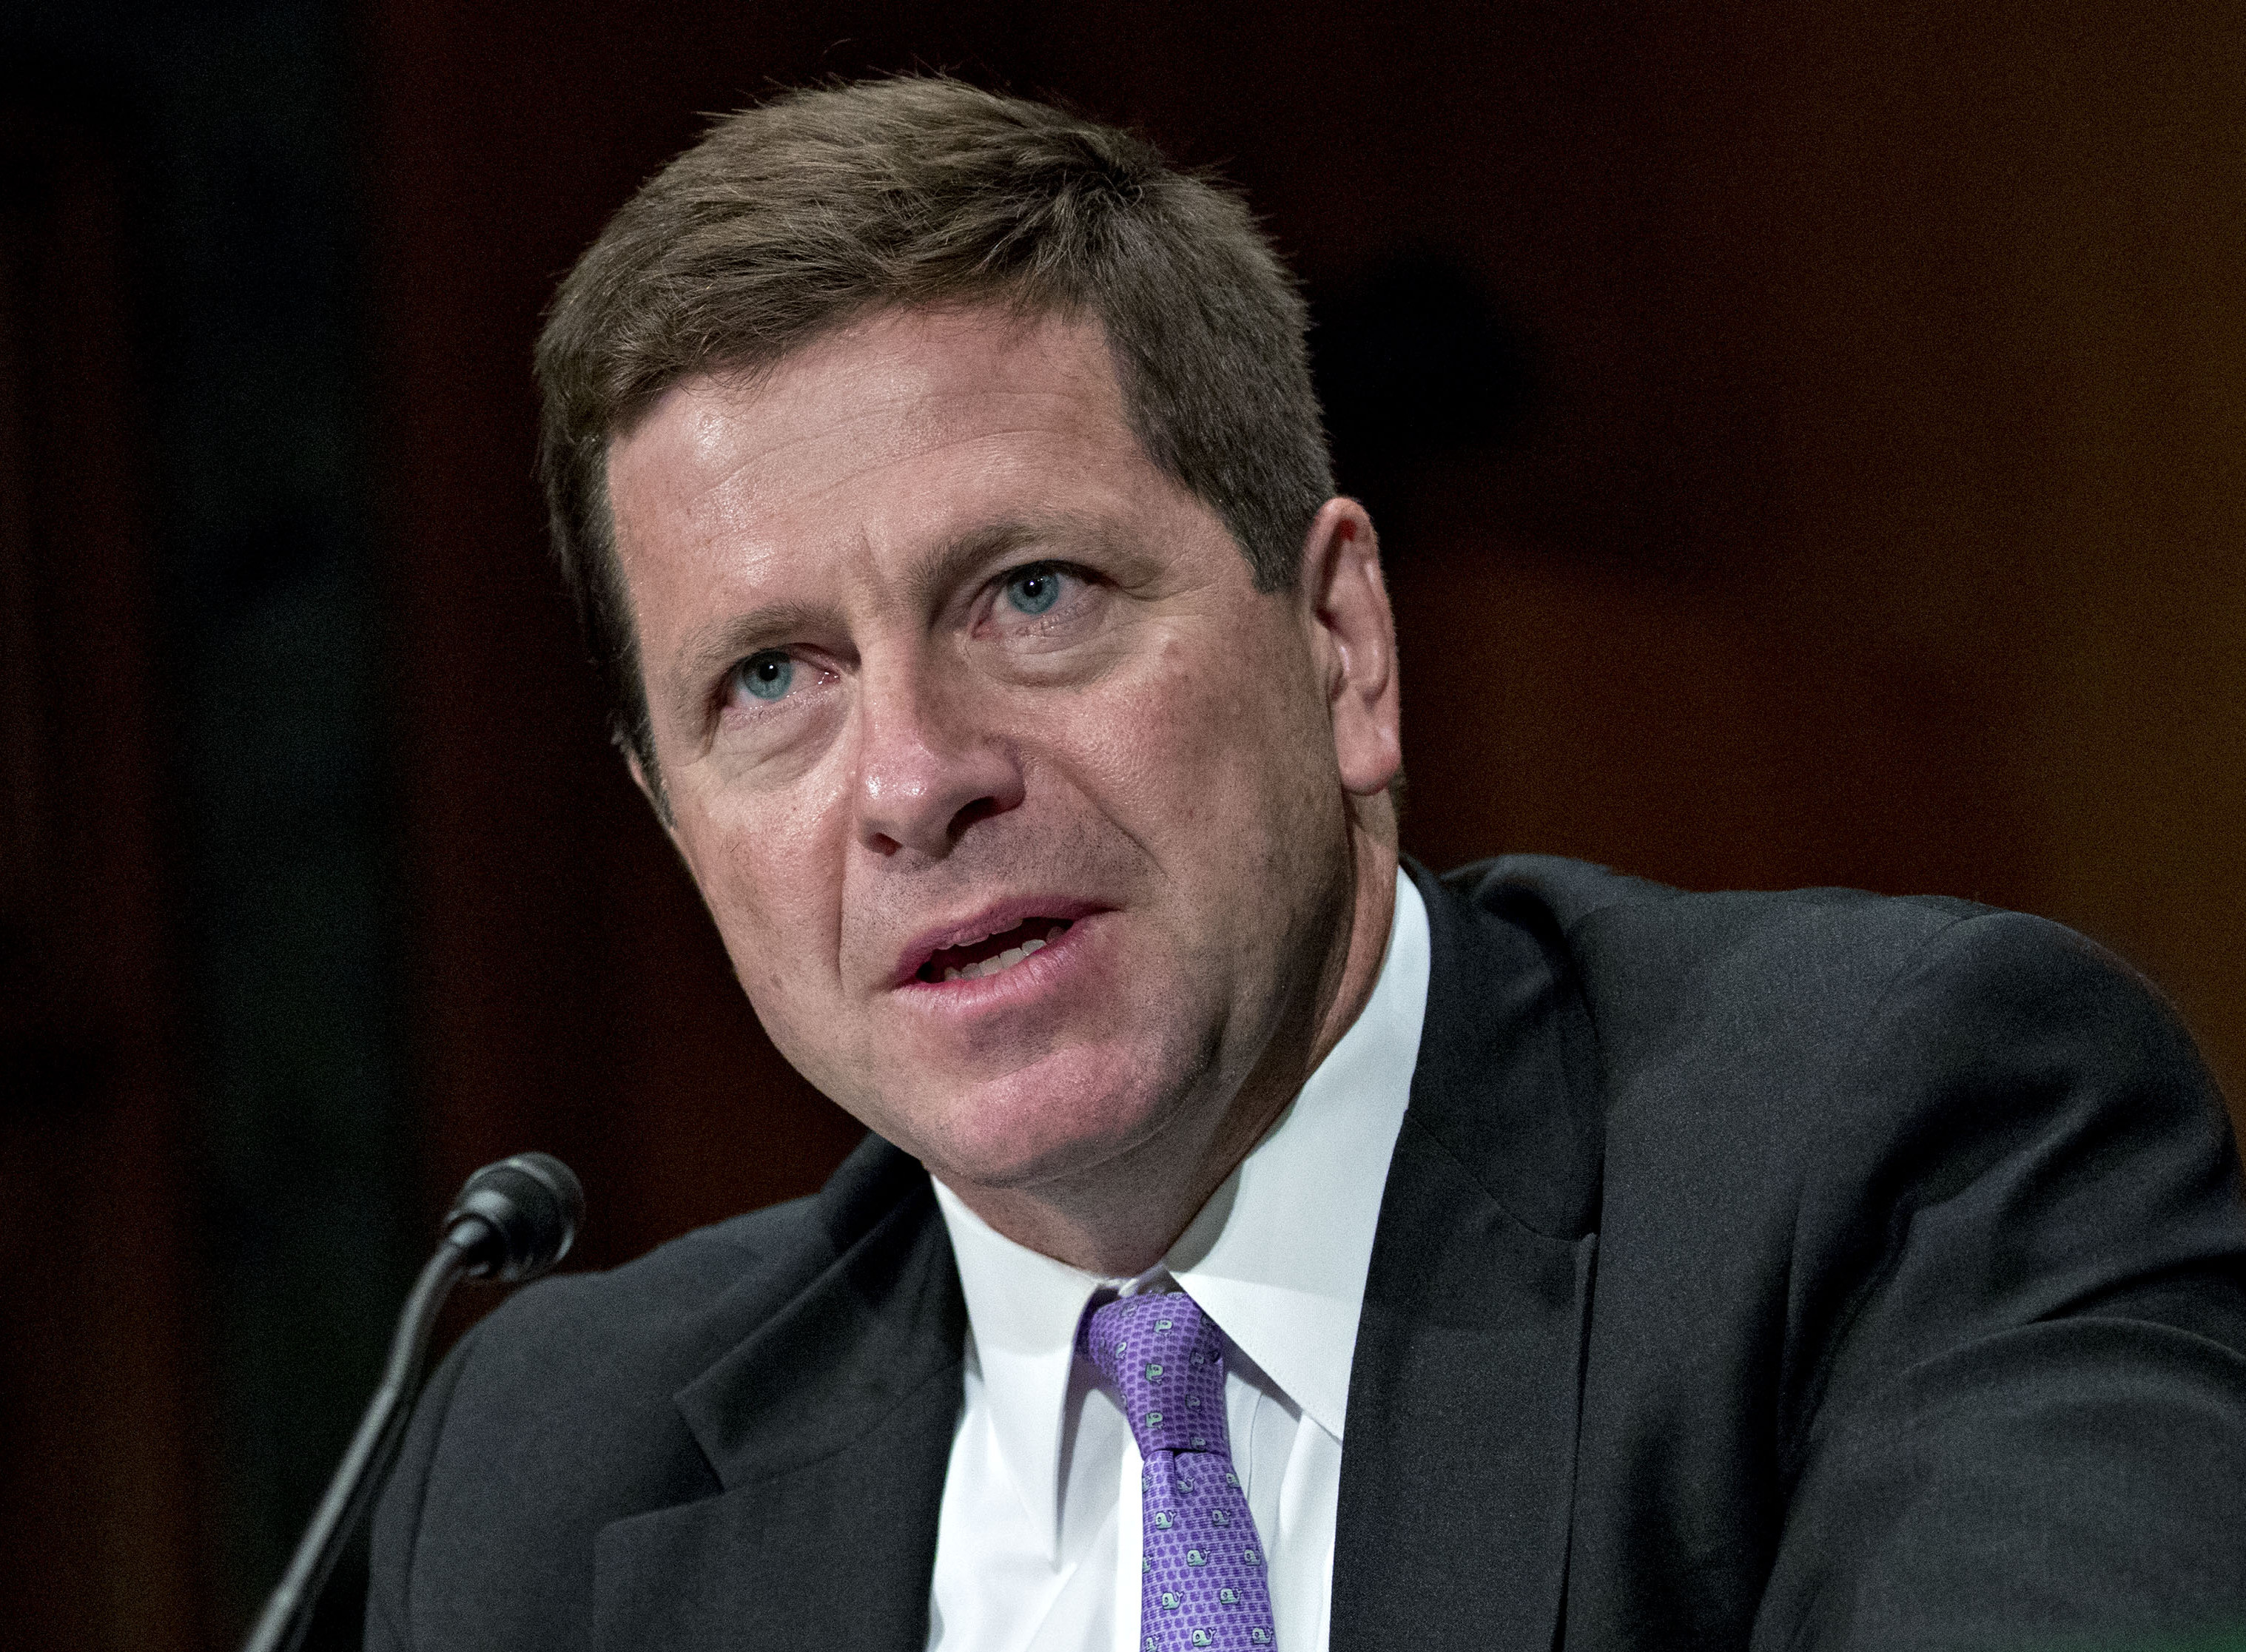 SEC Chairman Clayton: Broker Sales Contests Should Be Eliminated